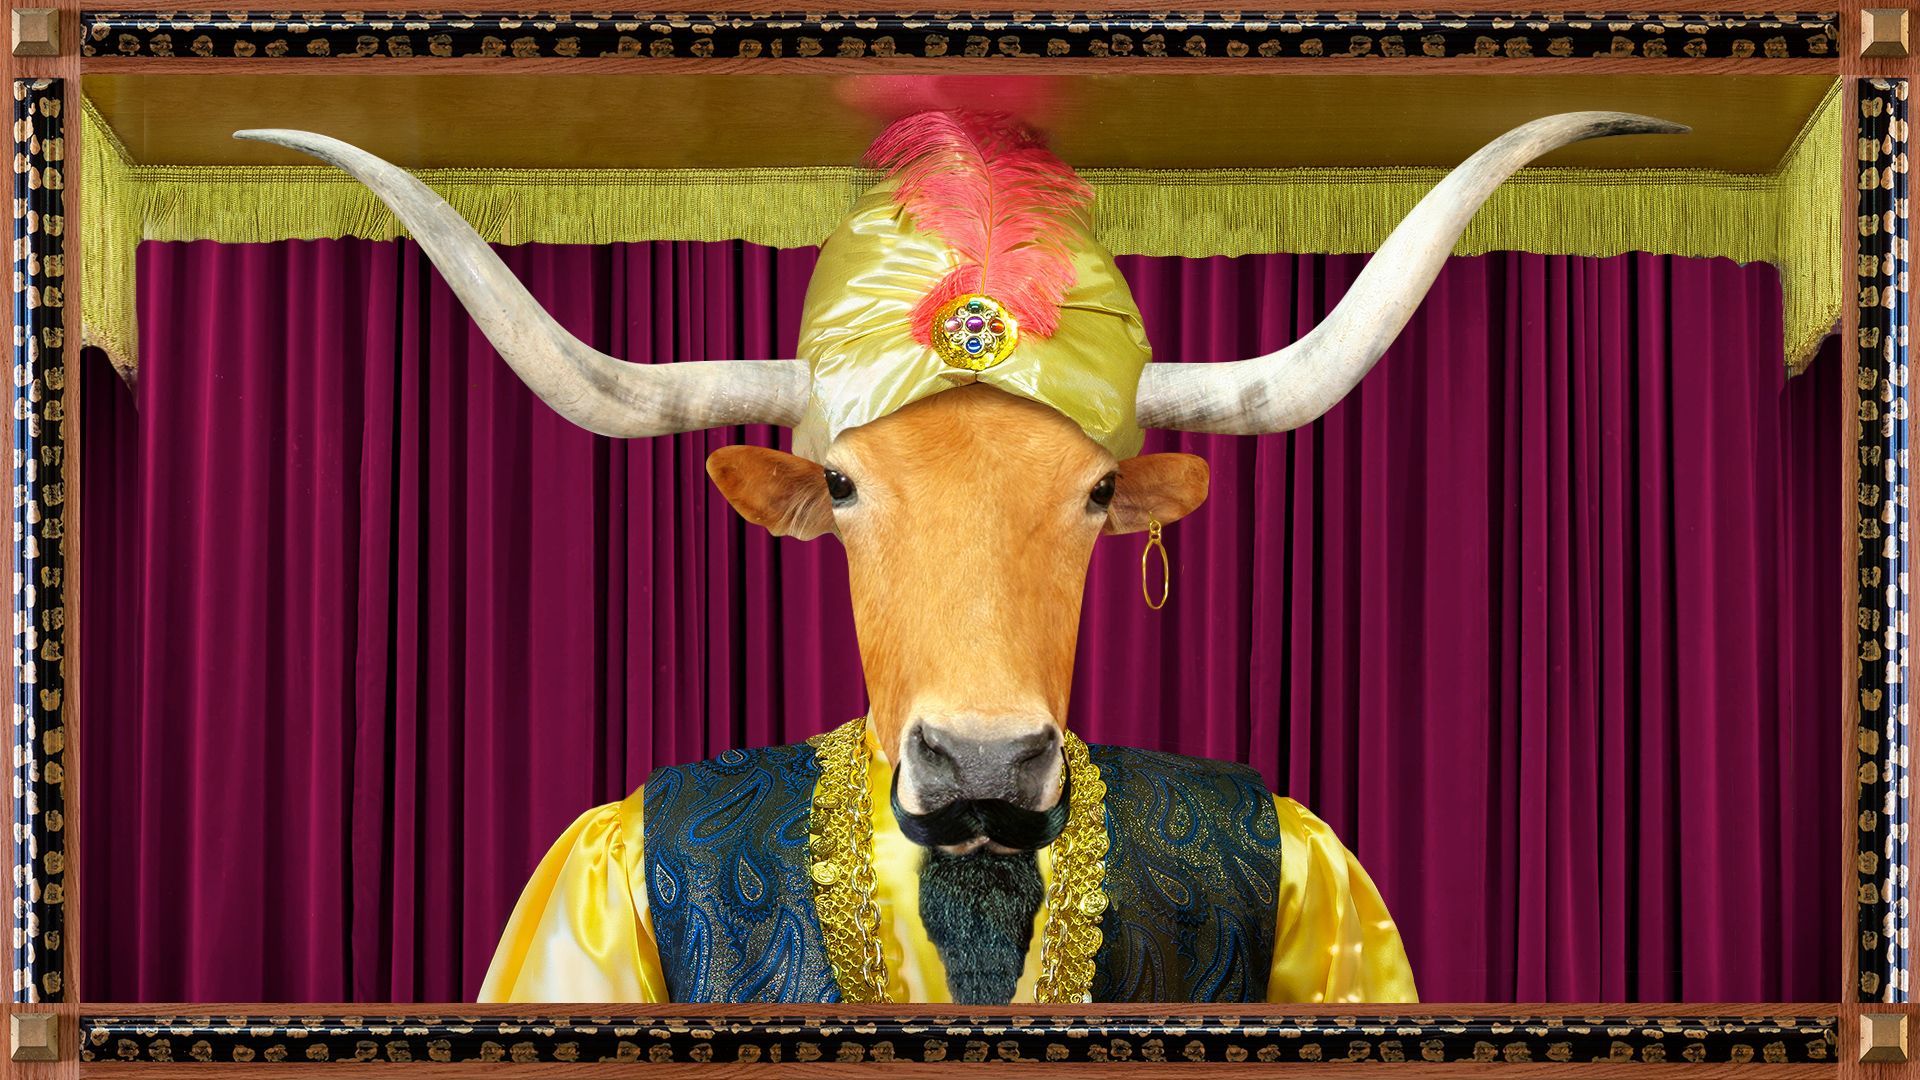 Illustration of a bull stylized as a Zoltar figure in a fortune telling cabinet. 